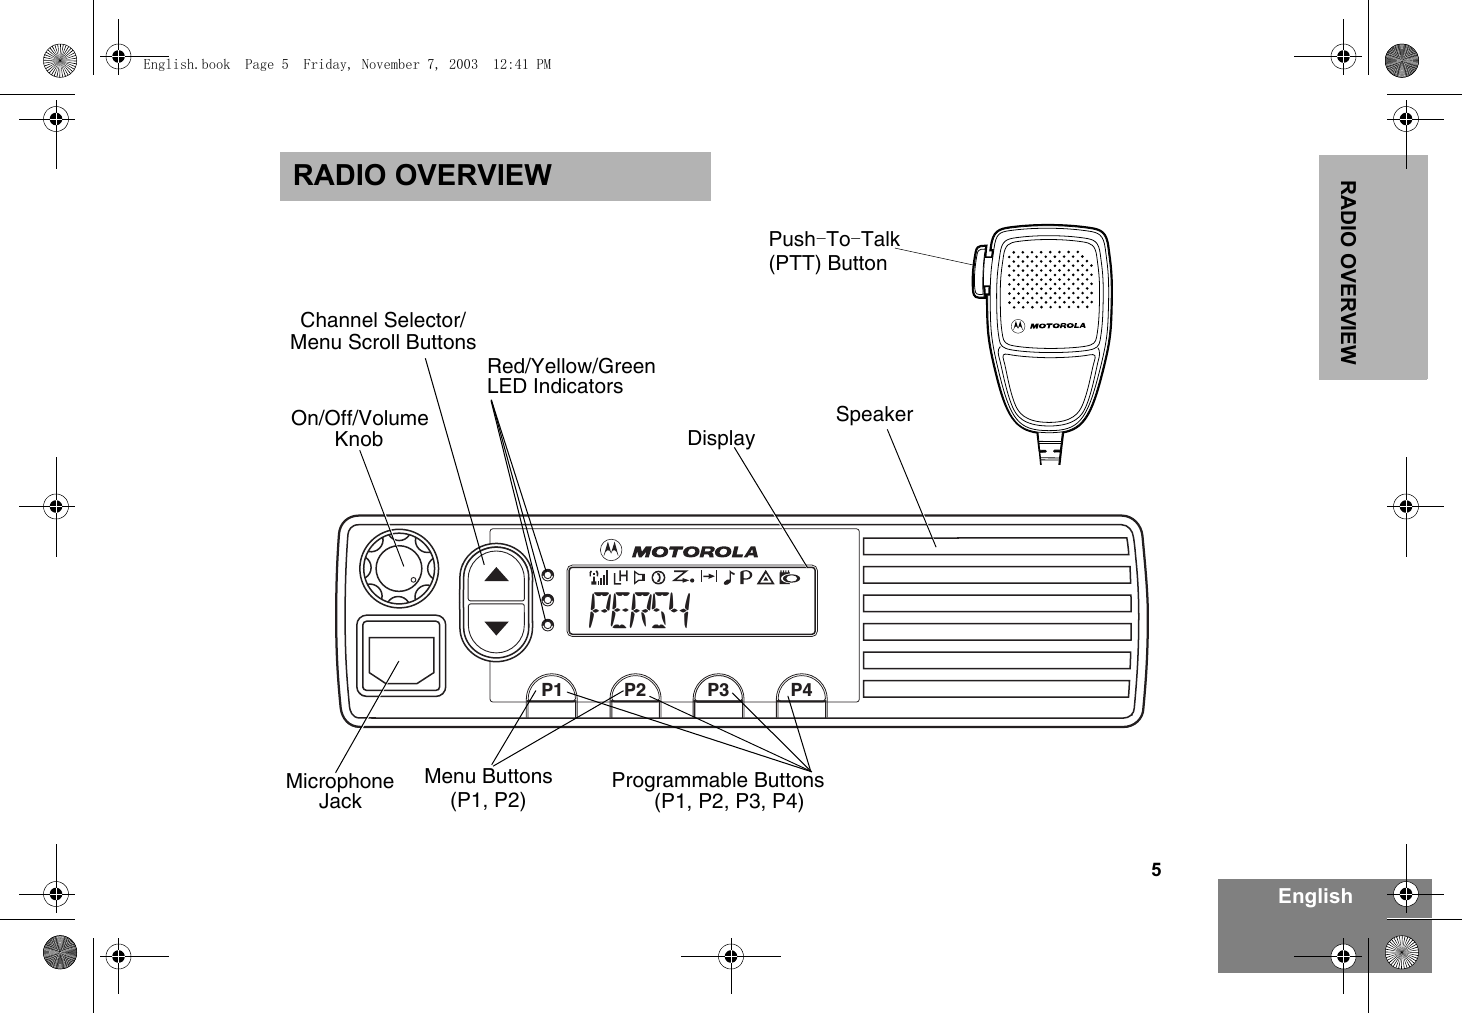 5EnglishRADIO OVERVIEWRADIO OVERVIEWP2P1 P3 P4PERS4Red/Yellow/GreenLED Indicators(P1, P2, P3, P4)MicrophoneJackKnobOn/Off/VolumeProgrammable ButtonsDisplayChannel Selector/Push To Talk--(PTT) ButtonSpeakerMenu Scroll ButtonsMenu Buttons(P1, P2)English.book  Page 5  Friday, November 7, 2003  12:41 PM